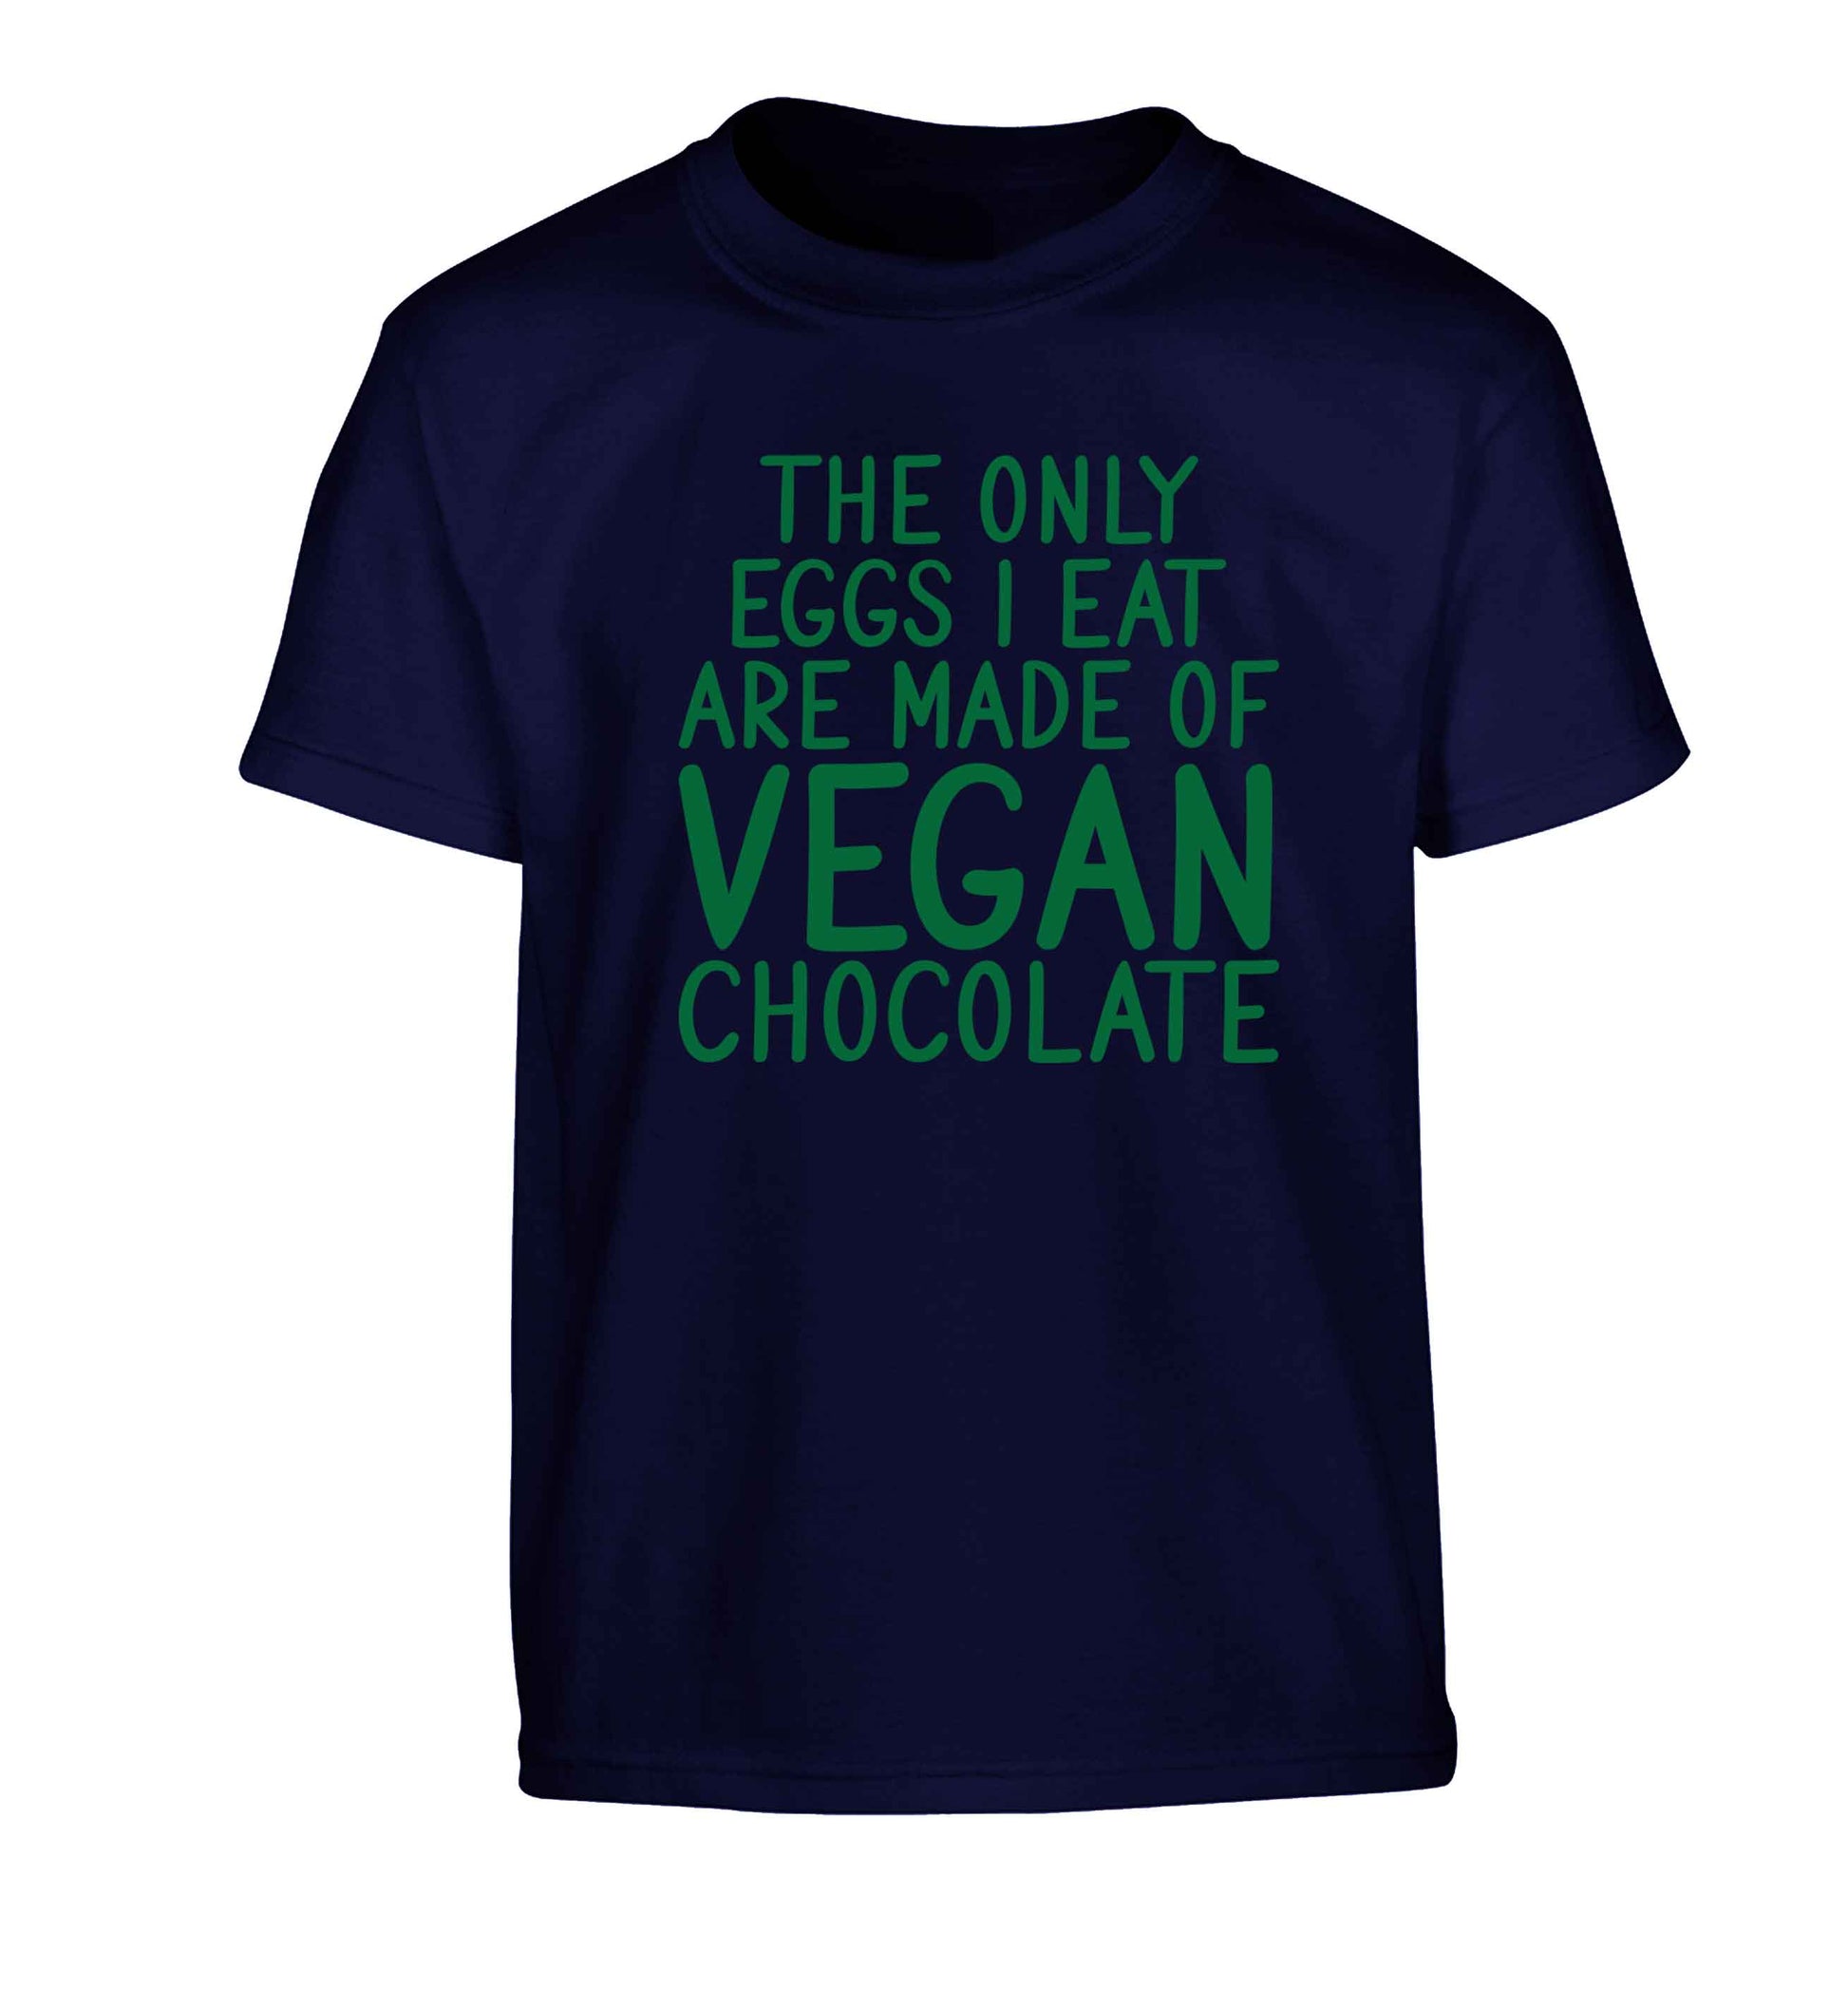 The only eggs I eat are made of vegan chocolate Children's navy Tshirt 12-13 Years